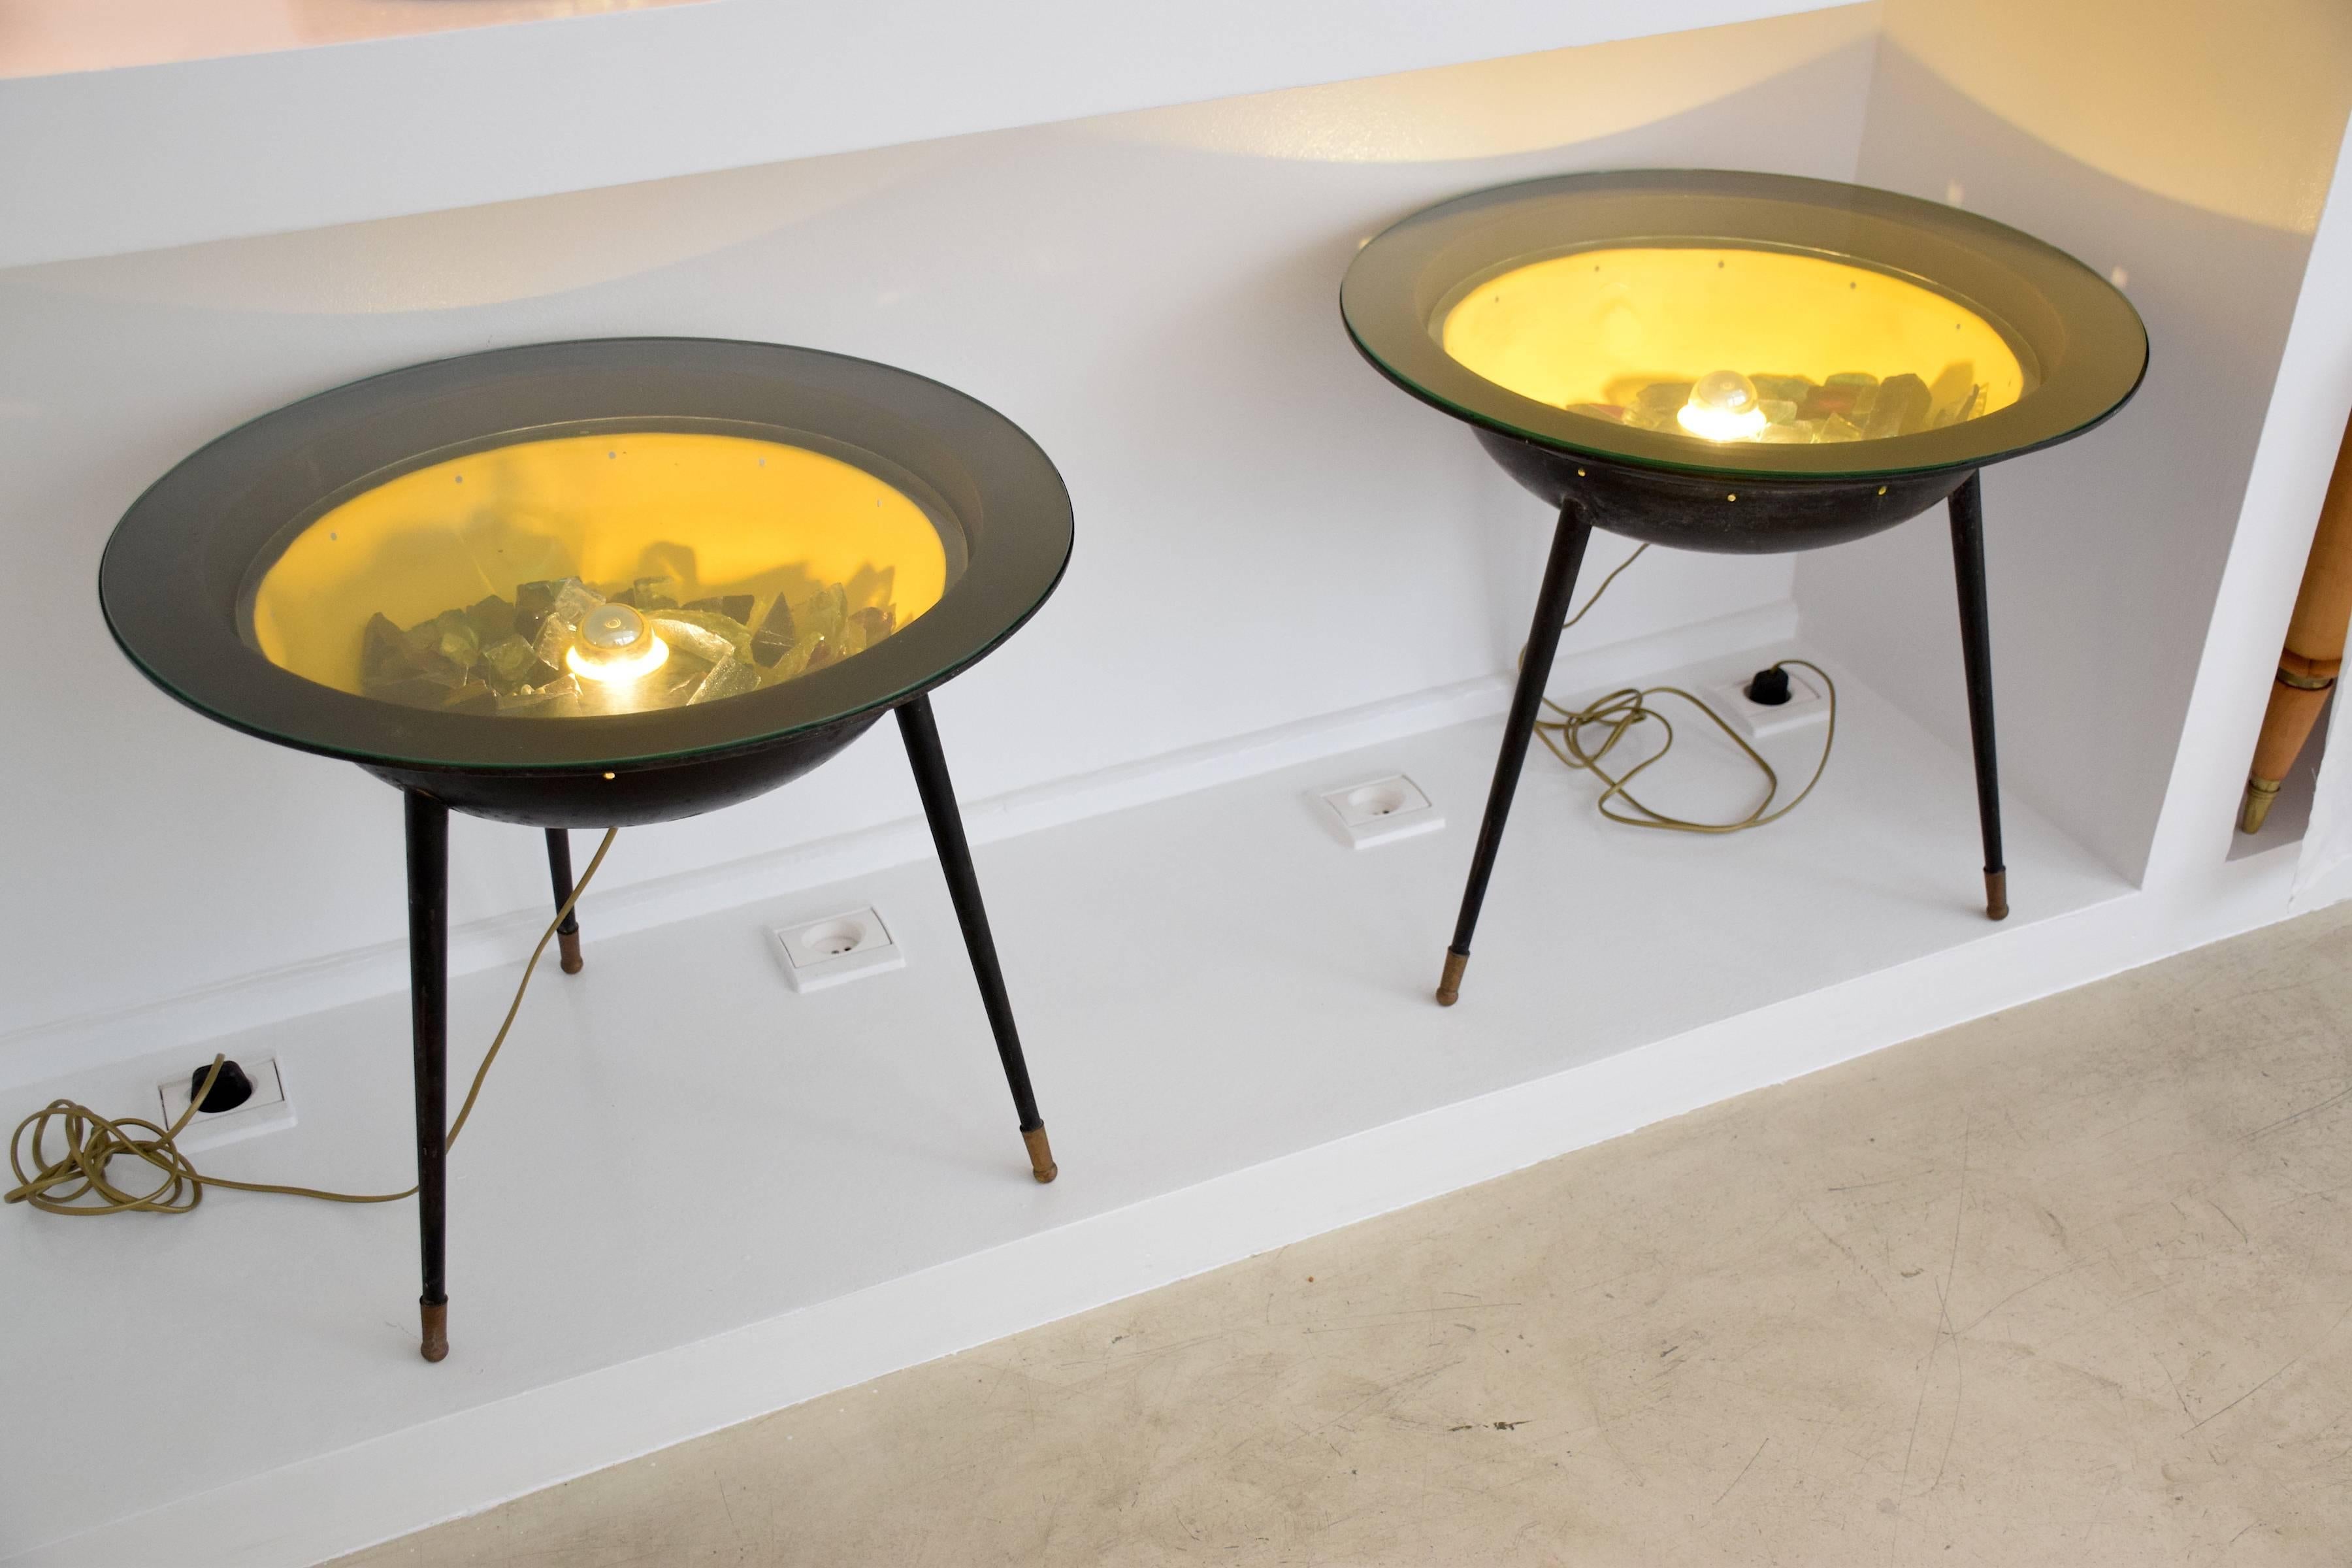 A pair of french 20th century vintage circular side or end coffee tables in mid-century Space Age style.
Both circular shaped collectible tables with glass tabletops are equipped with integrated lighting highlighting the different coloured